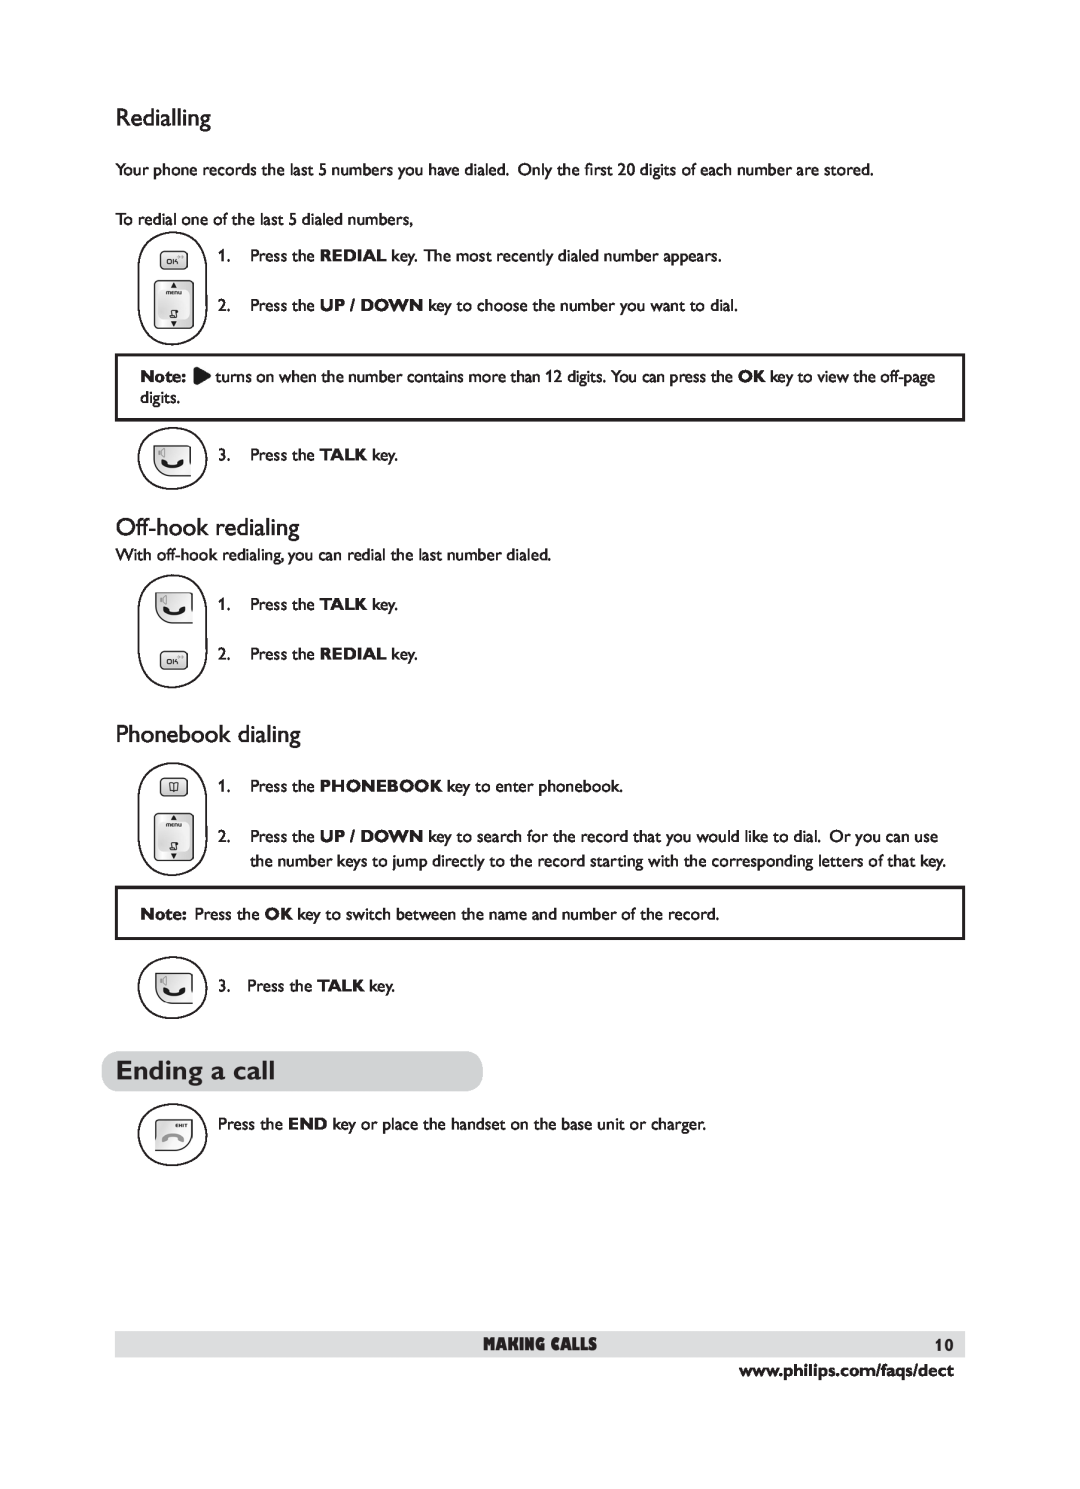 Philips DECT 221 user manual Ending a call, Redialling, Off-hook redialing, Phonebook dialing, Making Calls 